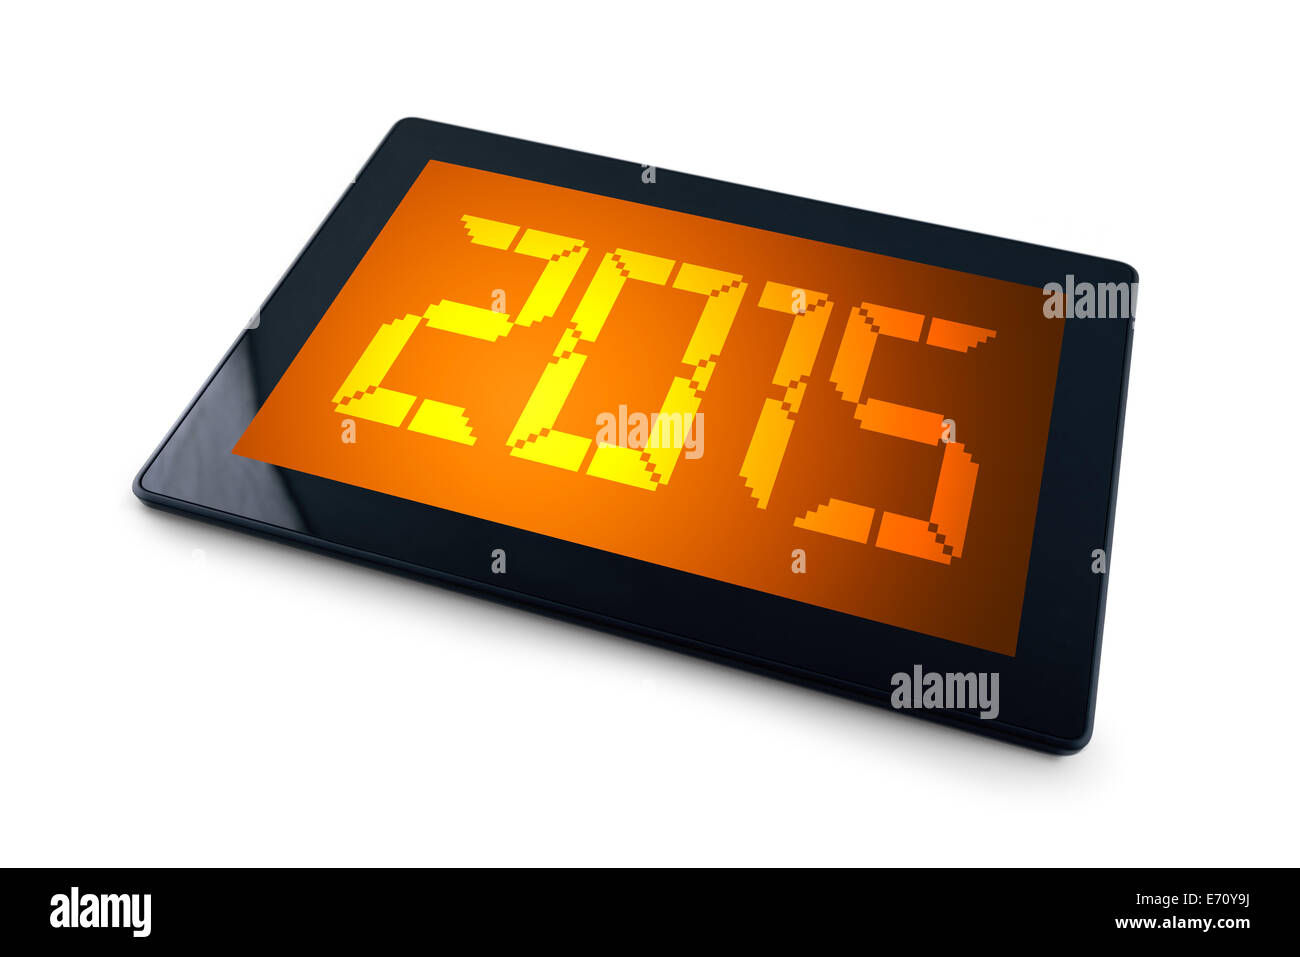 2015 on Generic Tablet PC display over white background. Happy New Year with modern technology high tech gadget in media era. Stock Photo